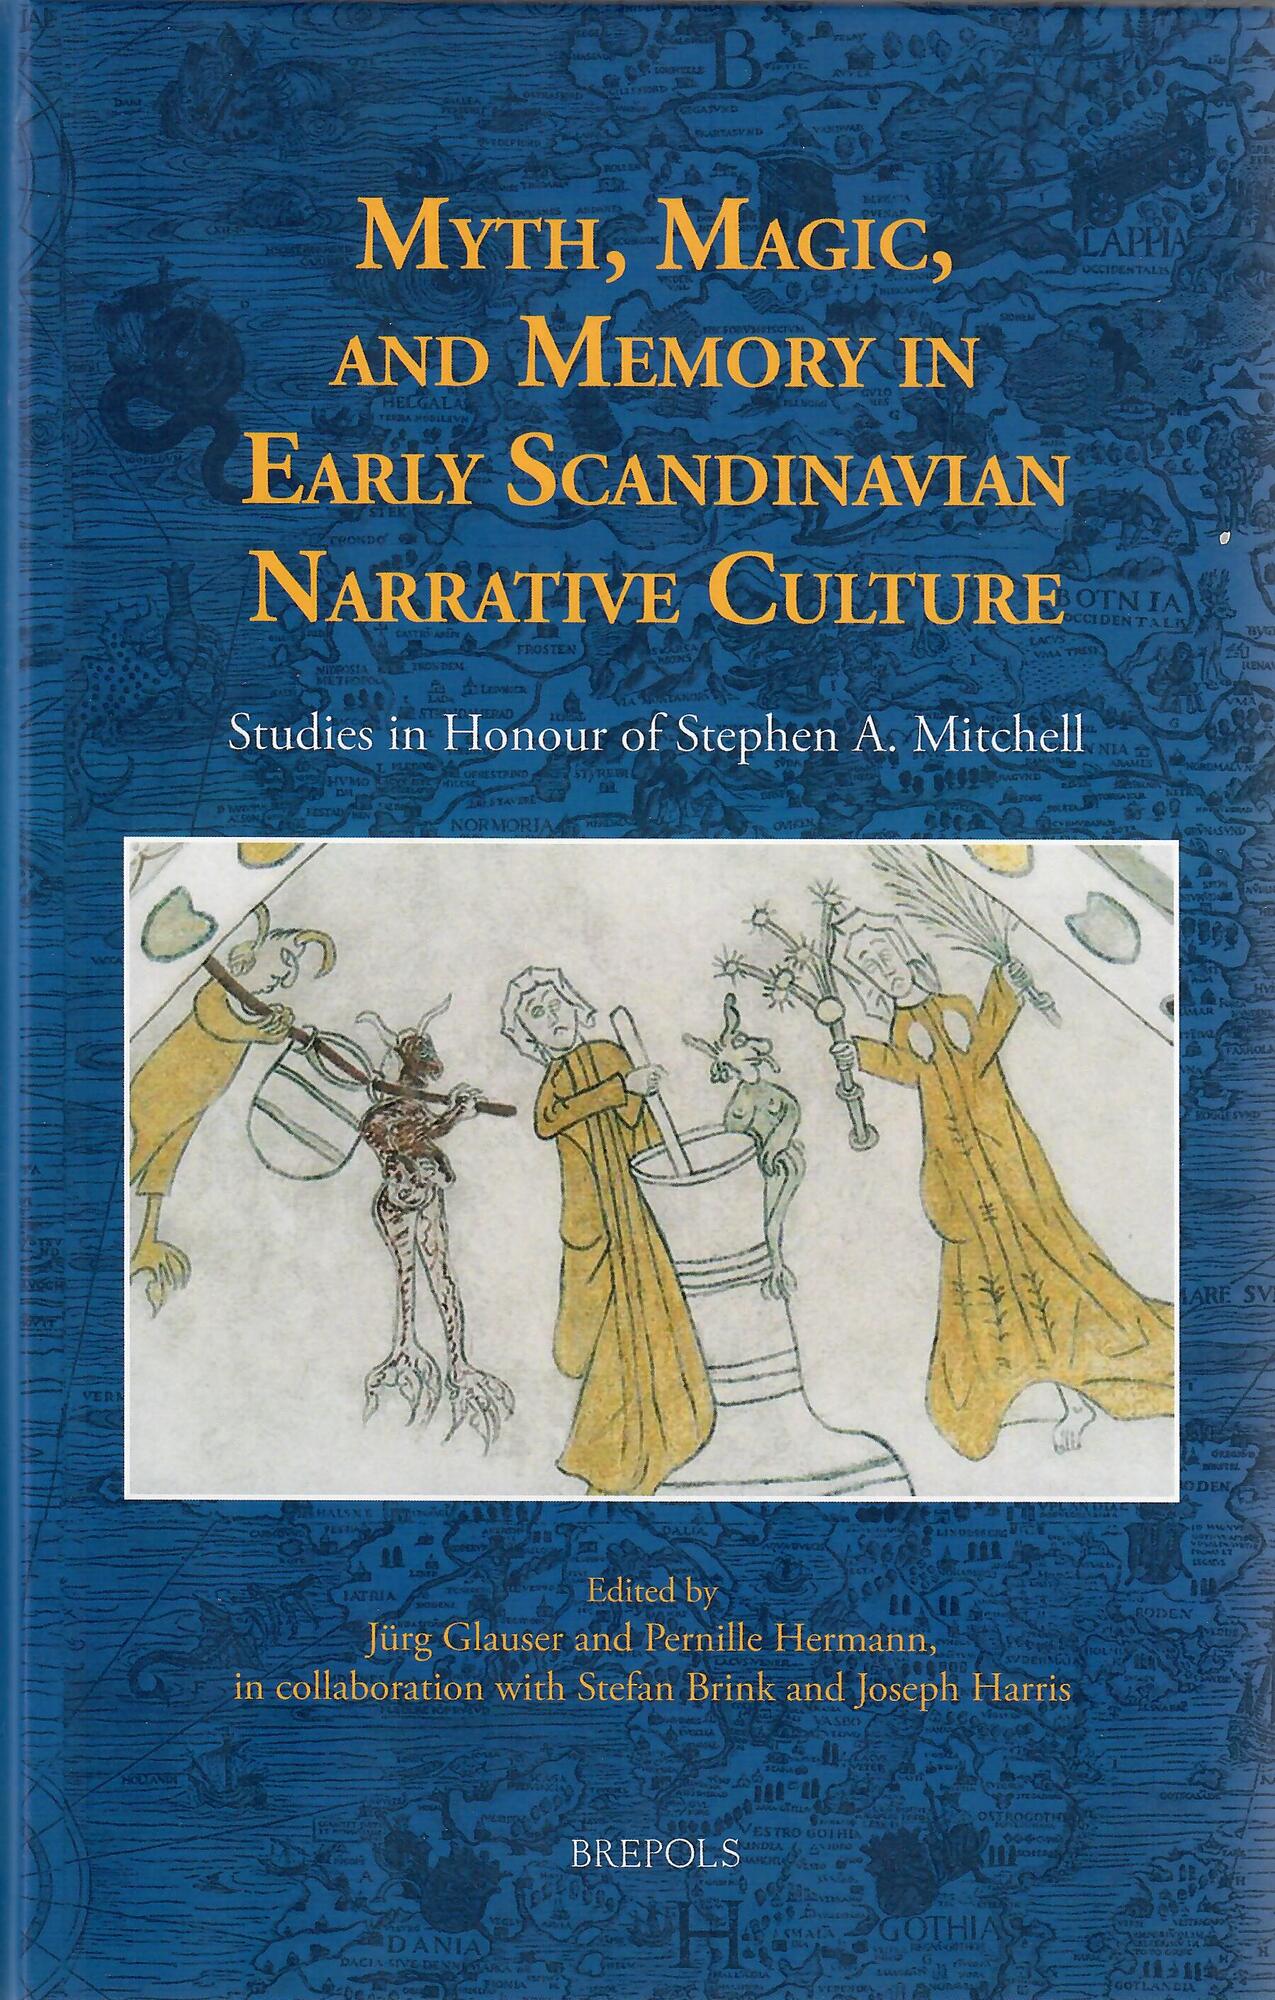 Myth, Magic, and Memory in Early Scandinavian Narrative Culture book cover